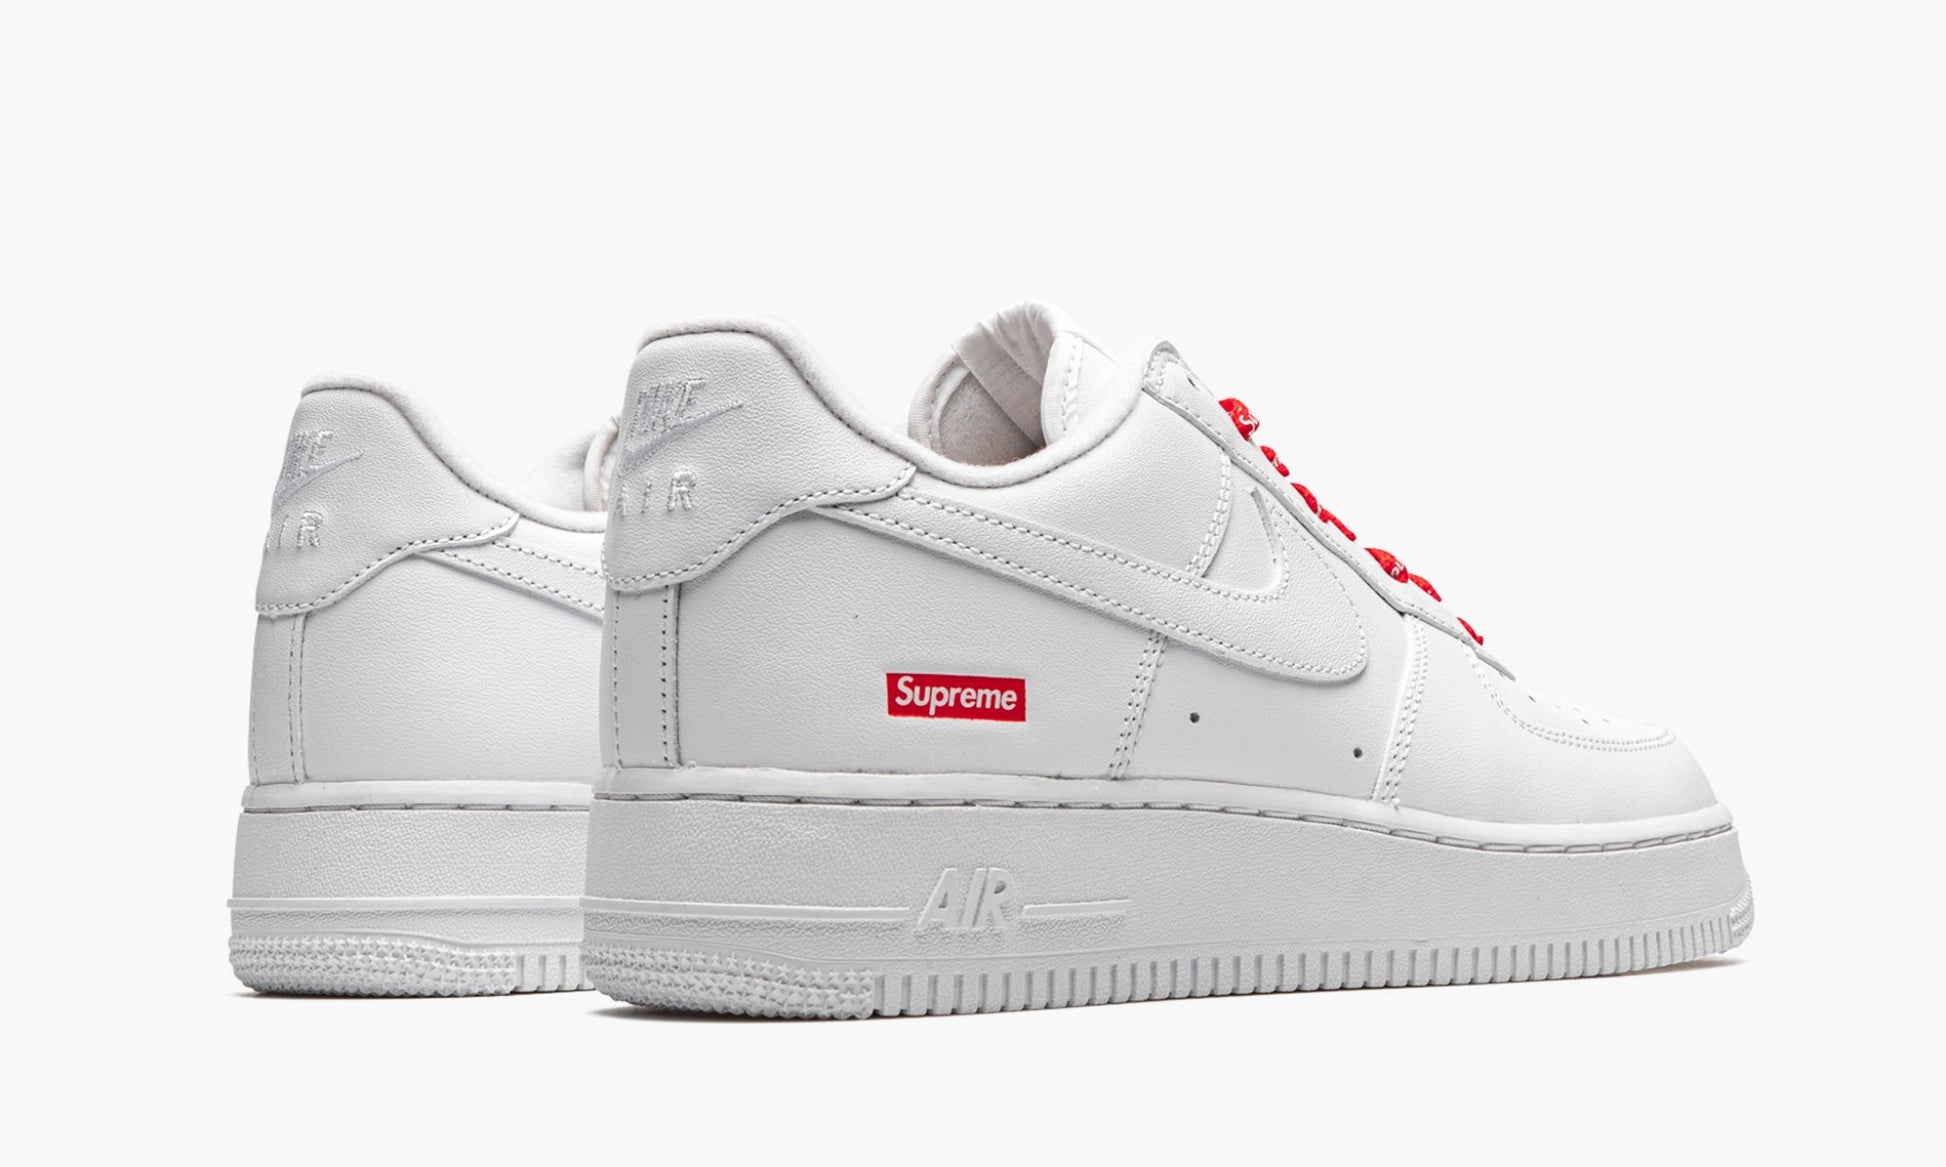 Nike Air Force 1 Low Supreme White - CU9225 100 - Archive